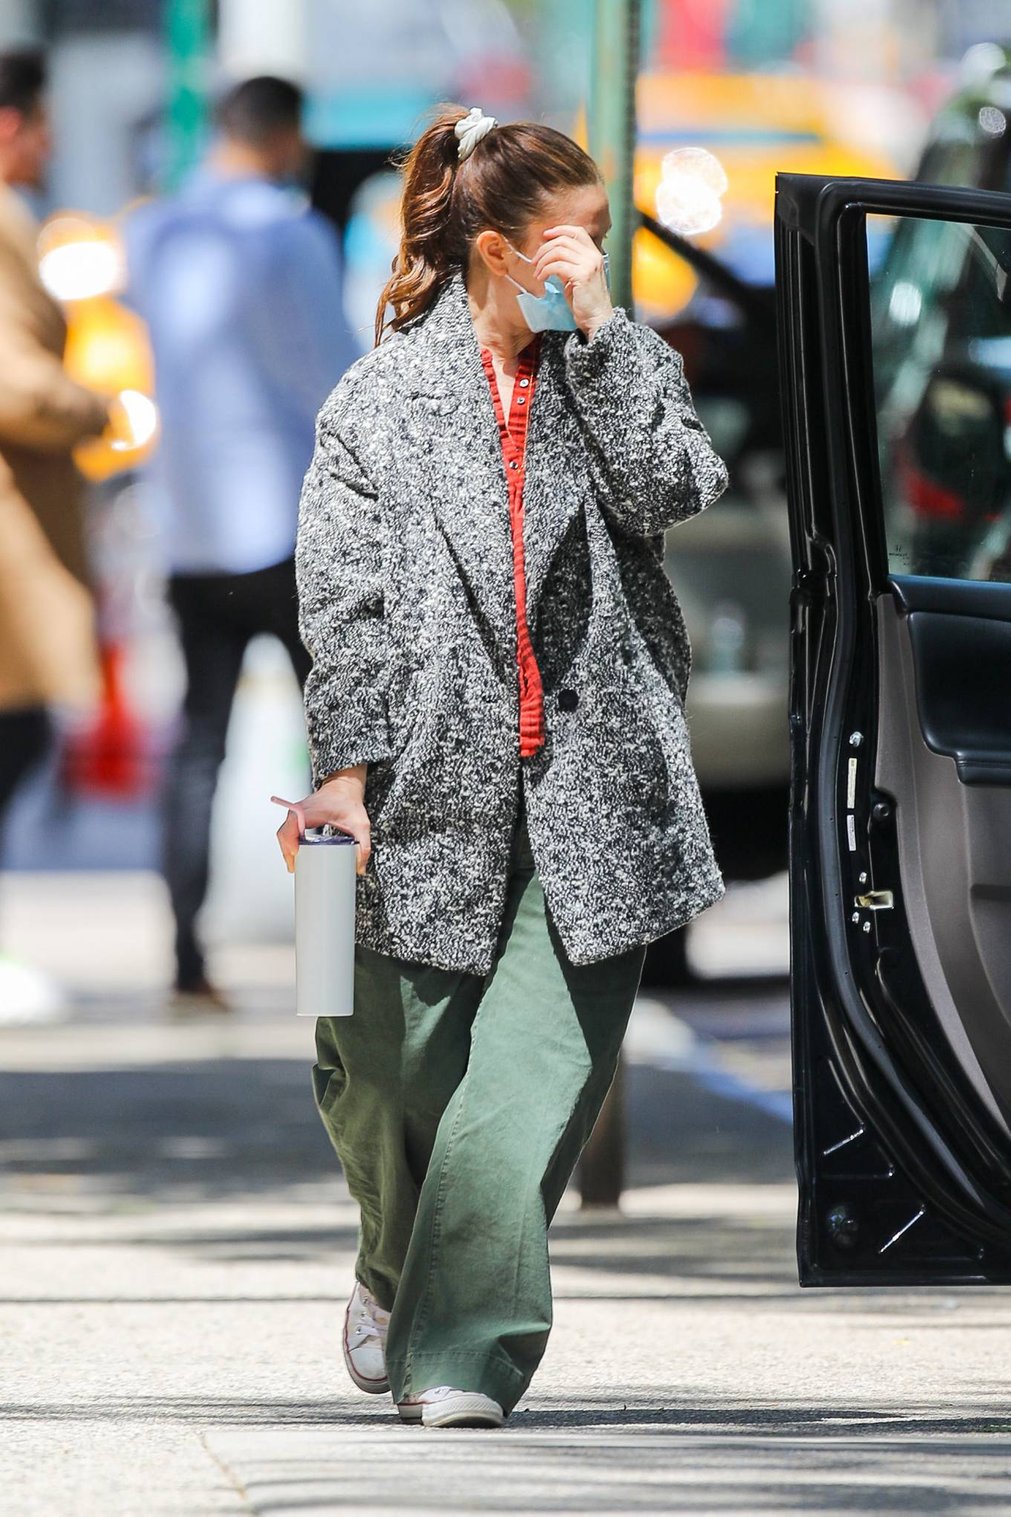 Drew Barrymore 2021 : Drew Barrymore – Seen with her dog while out and about in New York-01